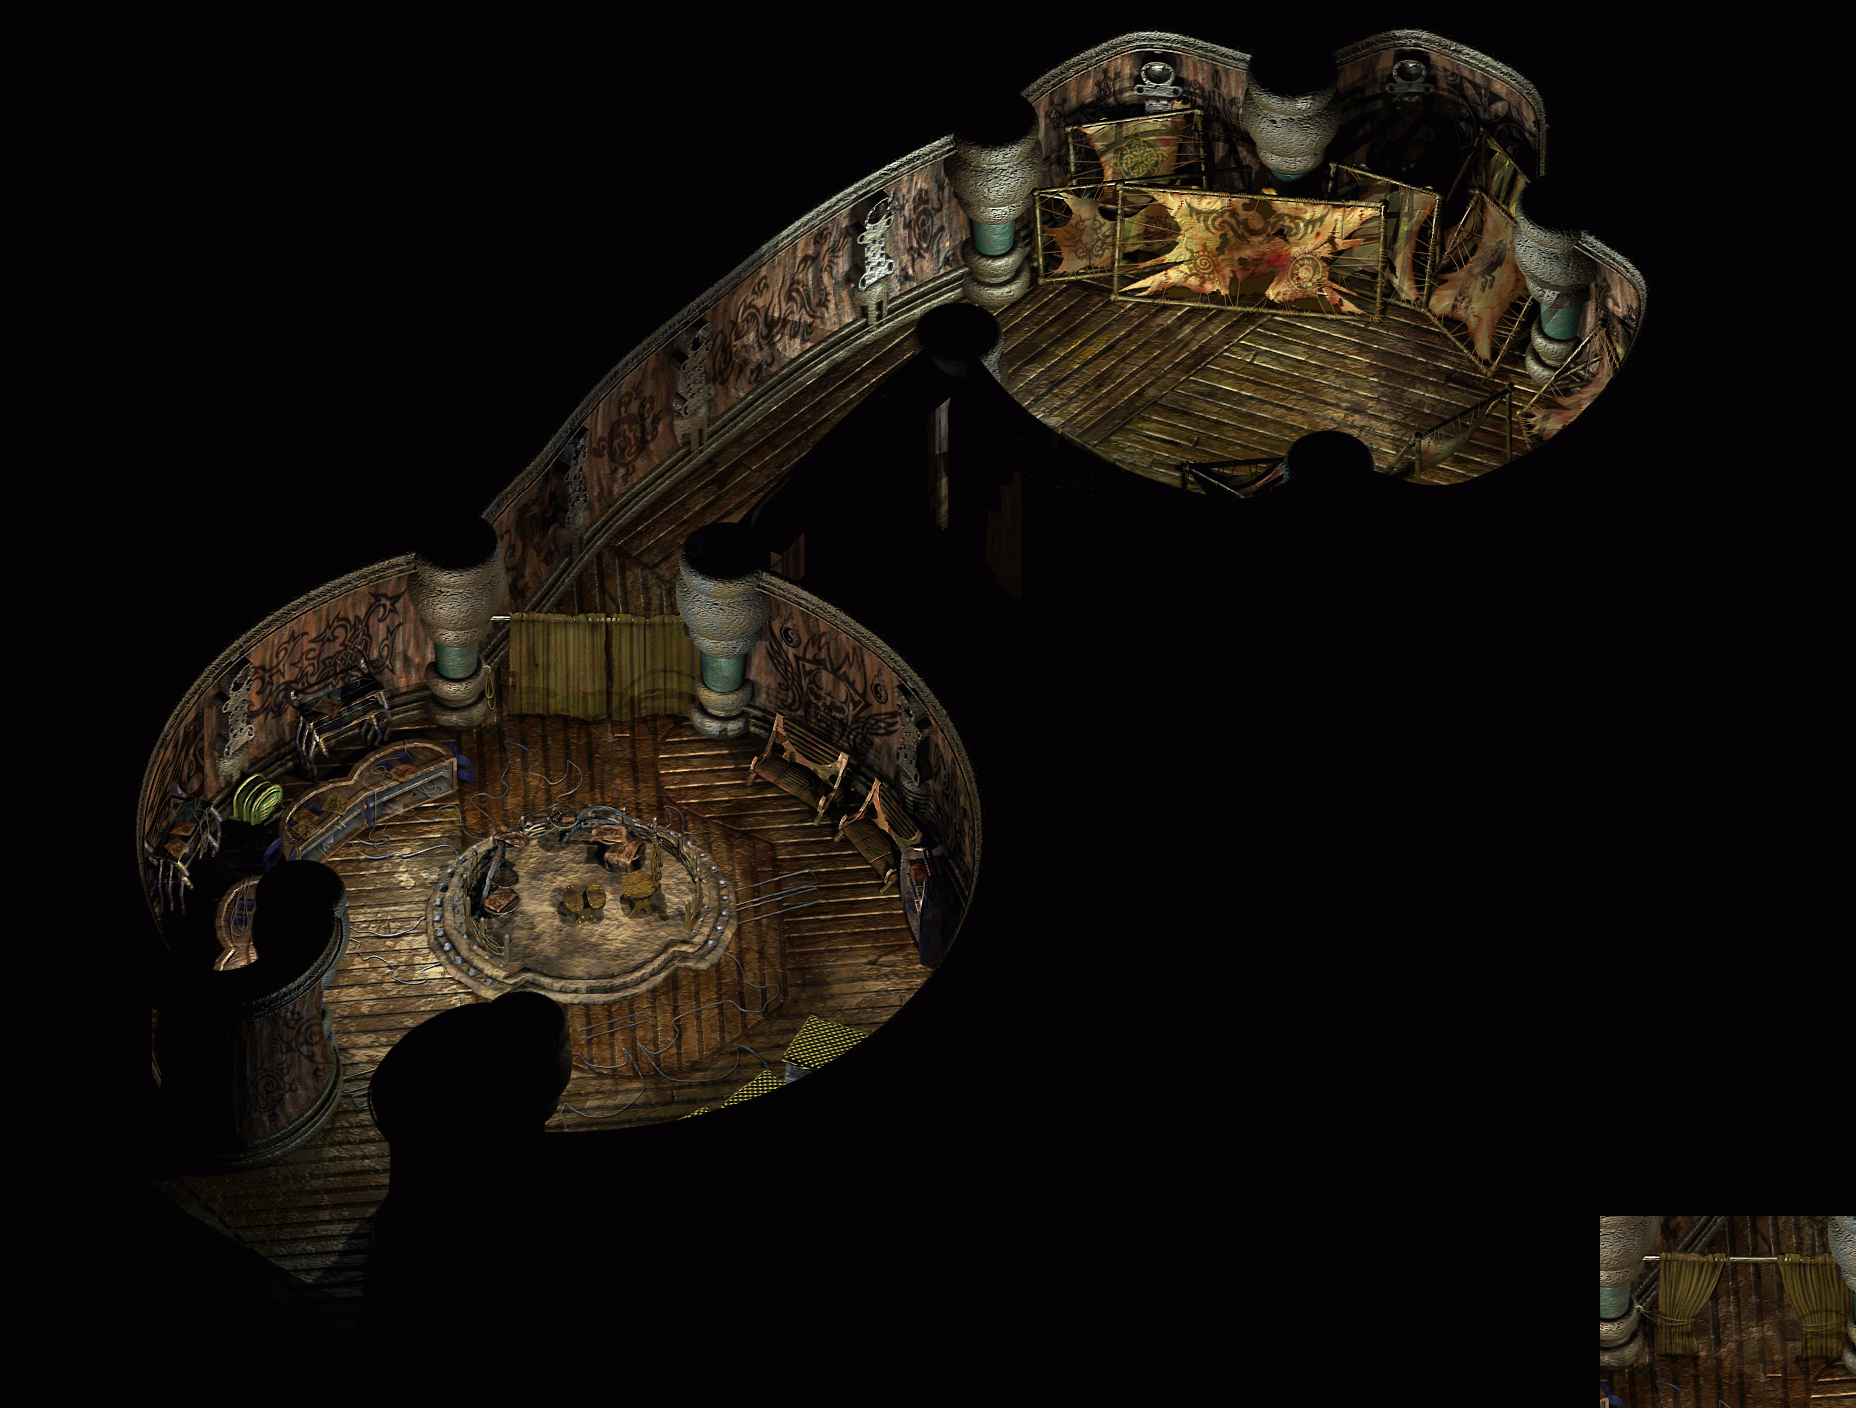 Planescape: Torment - Fell's Tattoo Parlor